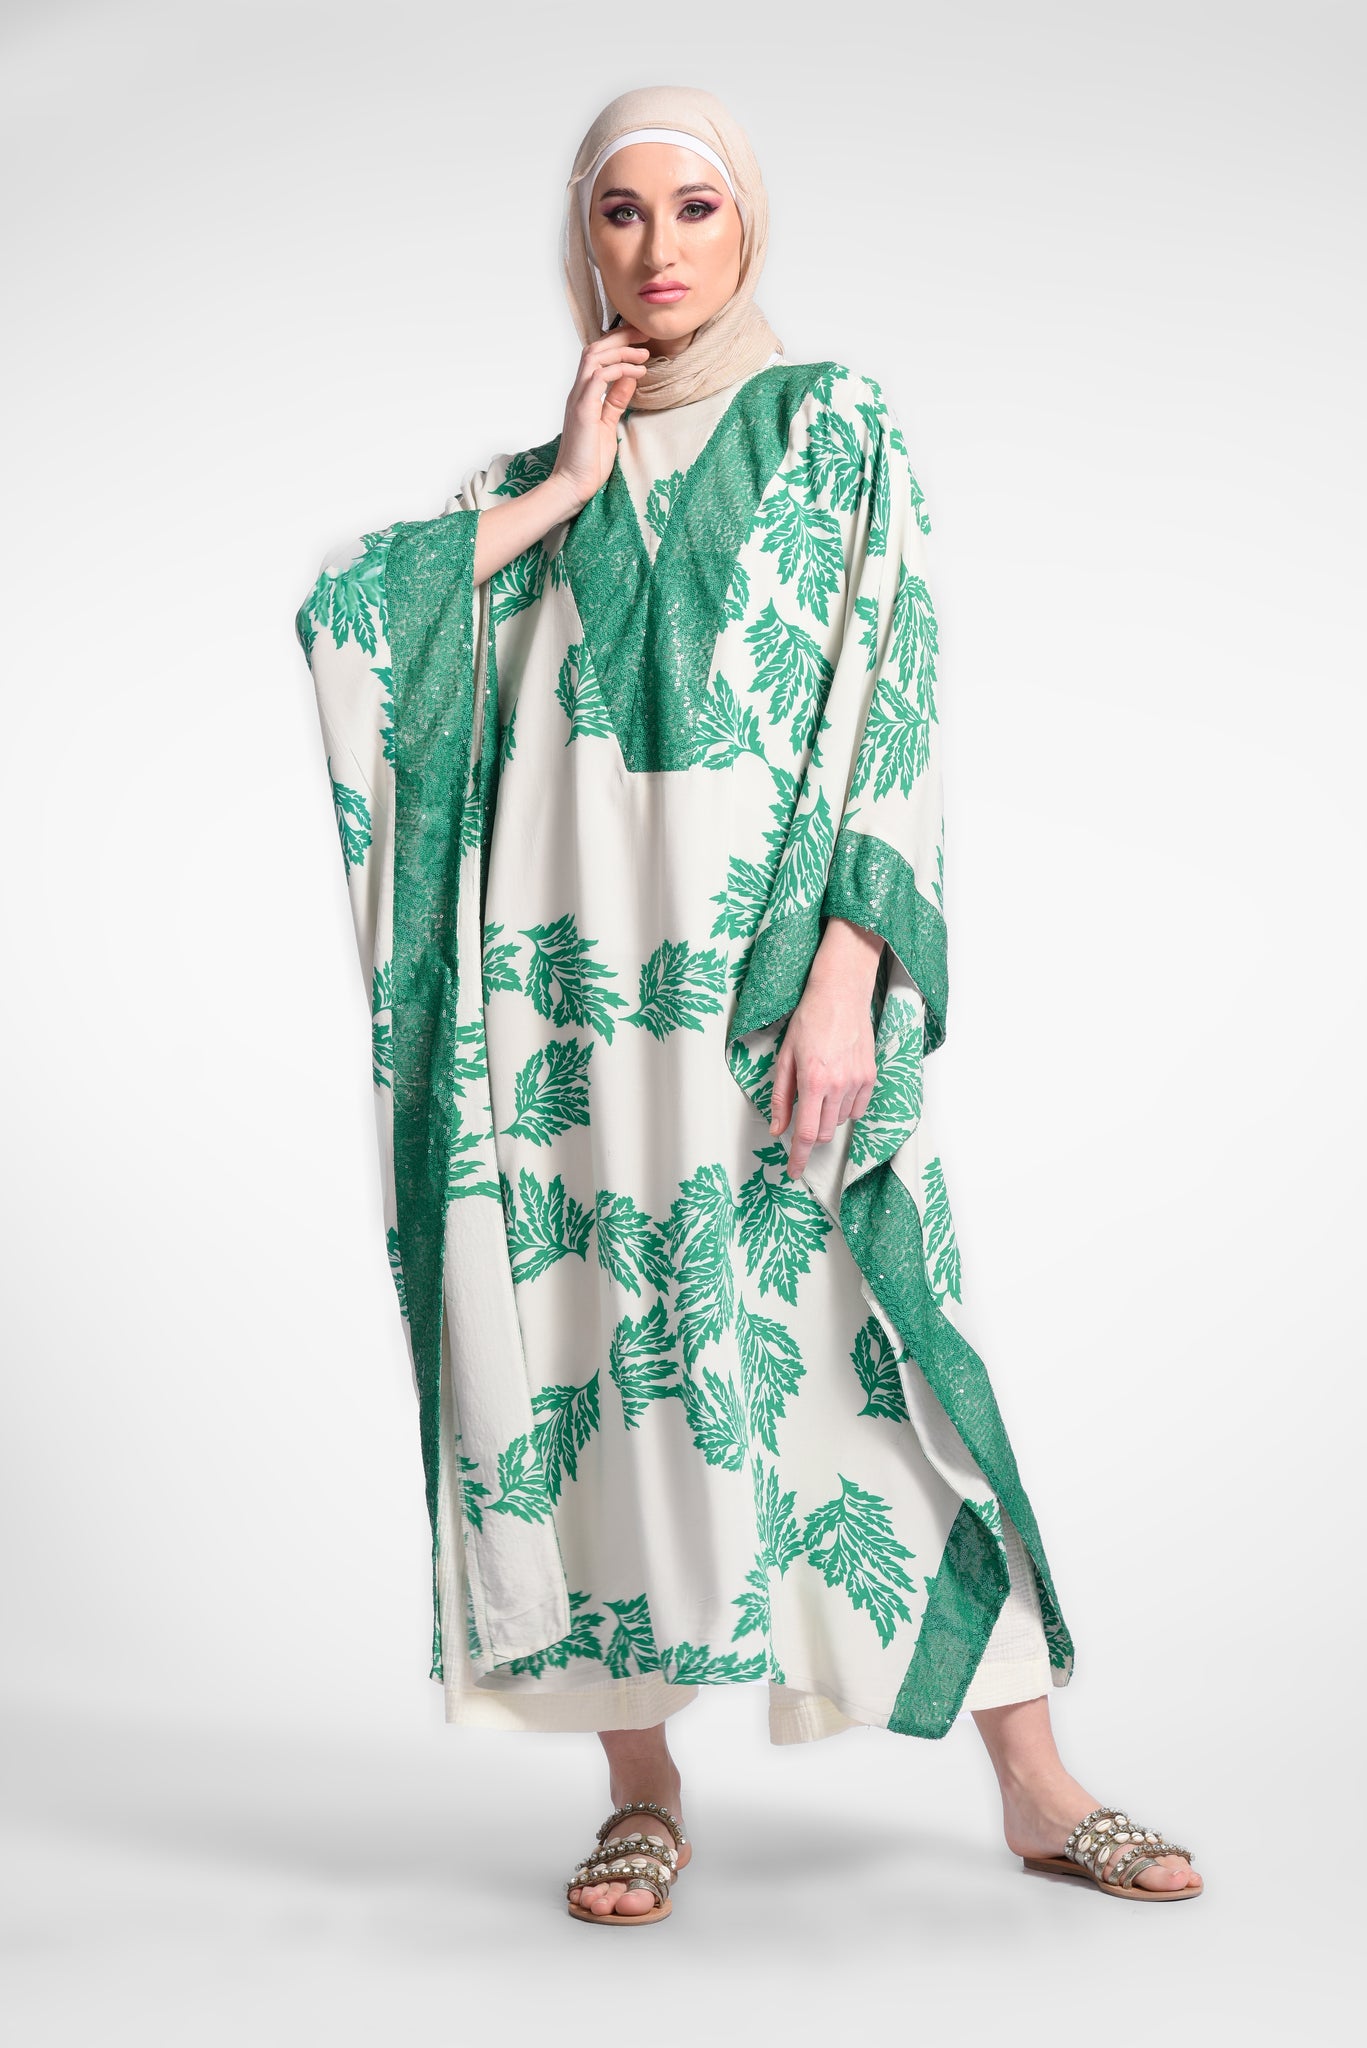 Green printed dress with long wide sleeves